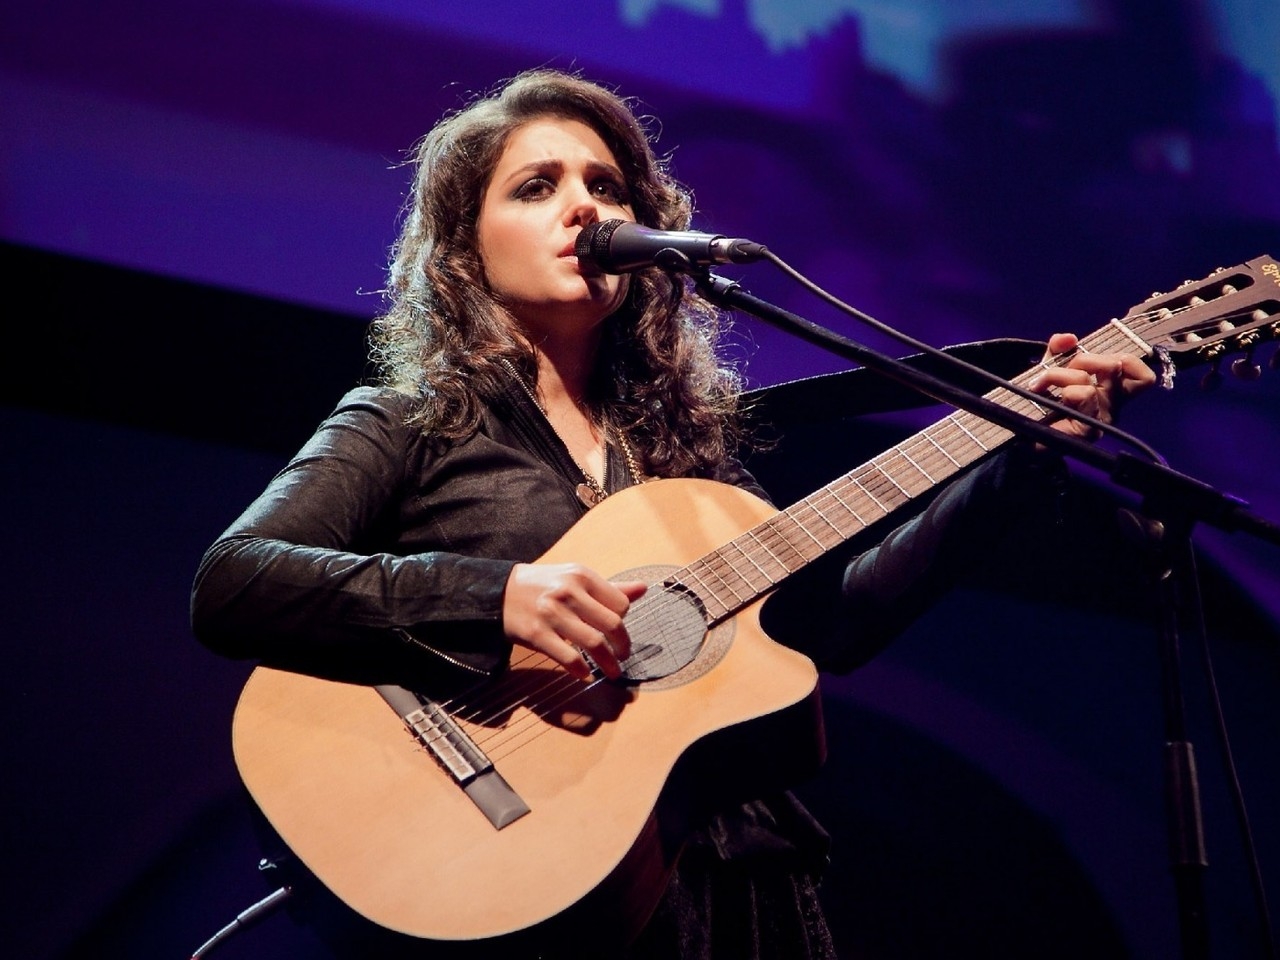 Katie Melua Performing on Stage for 1280 x 960 resolution